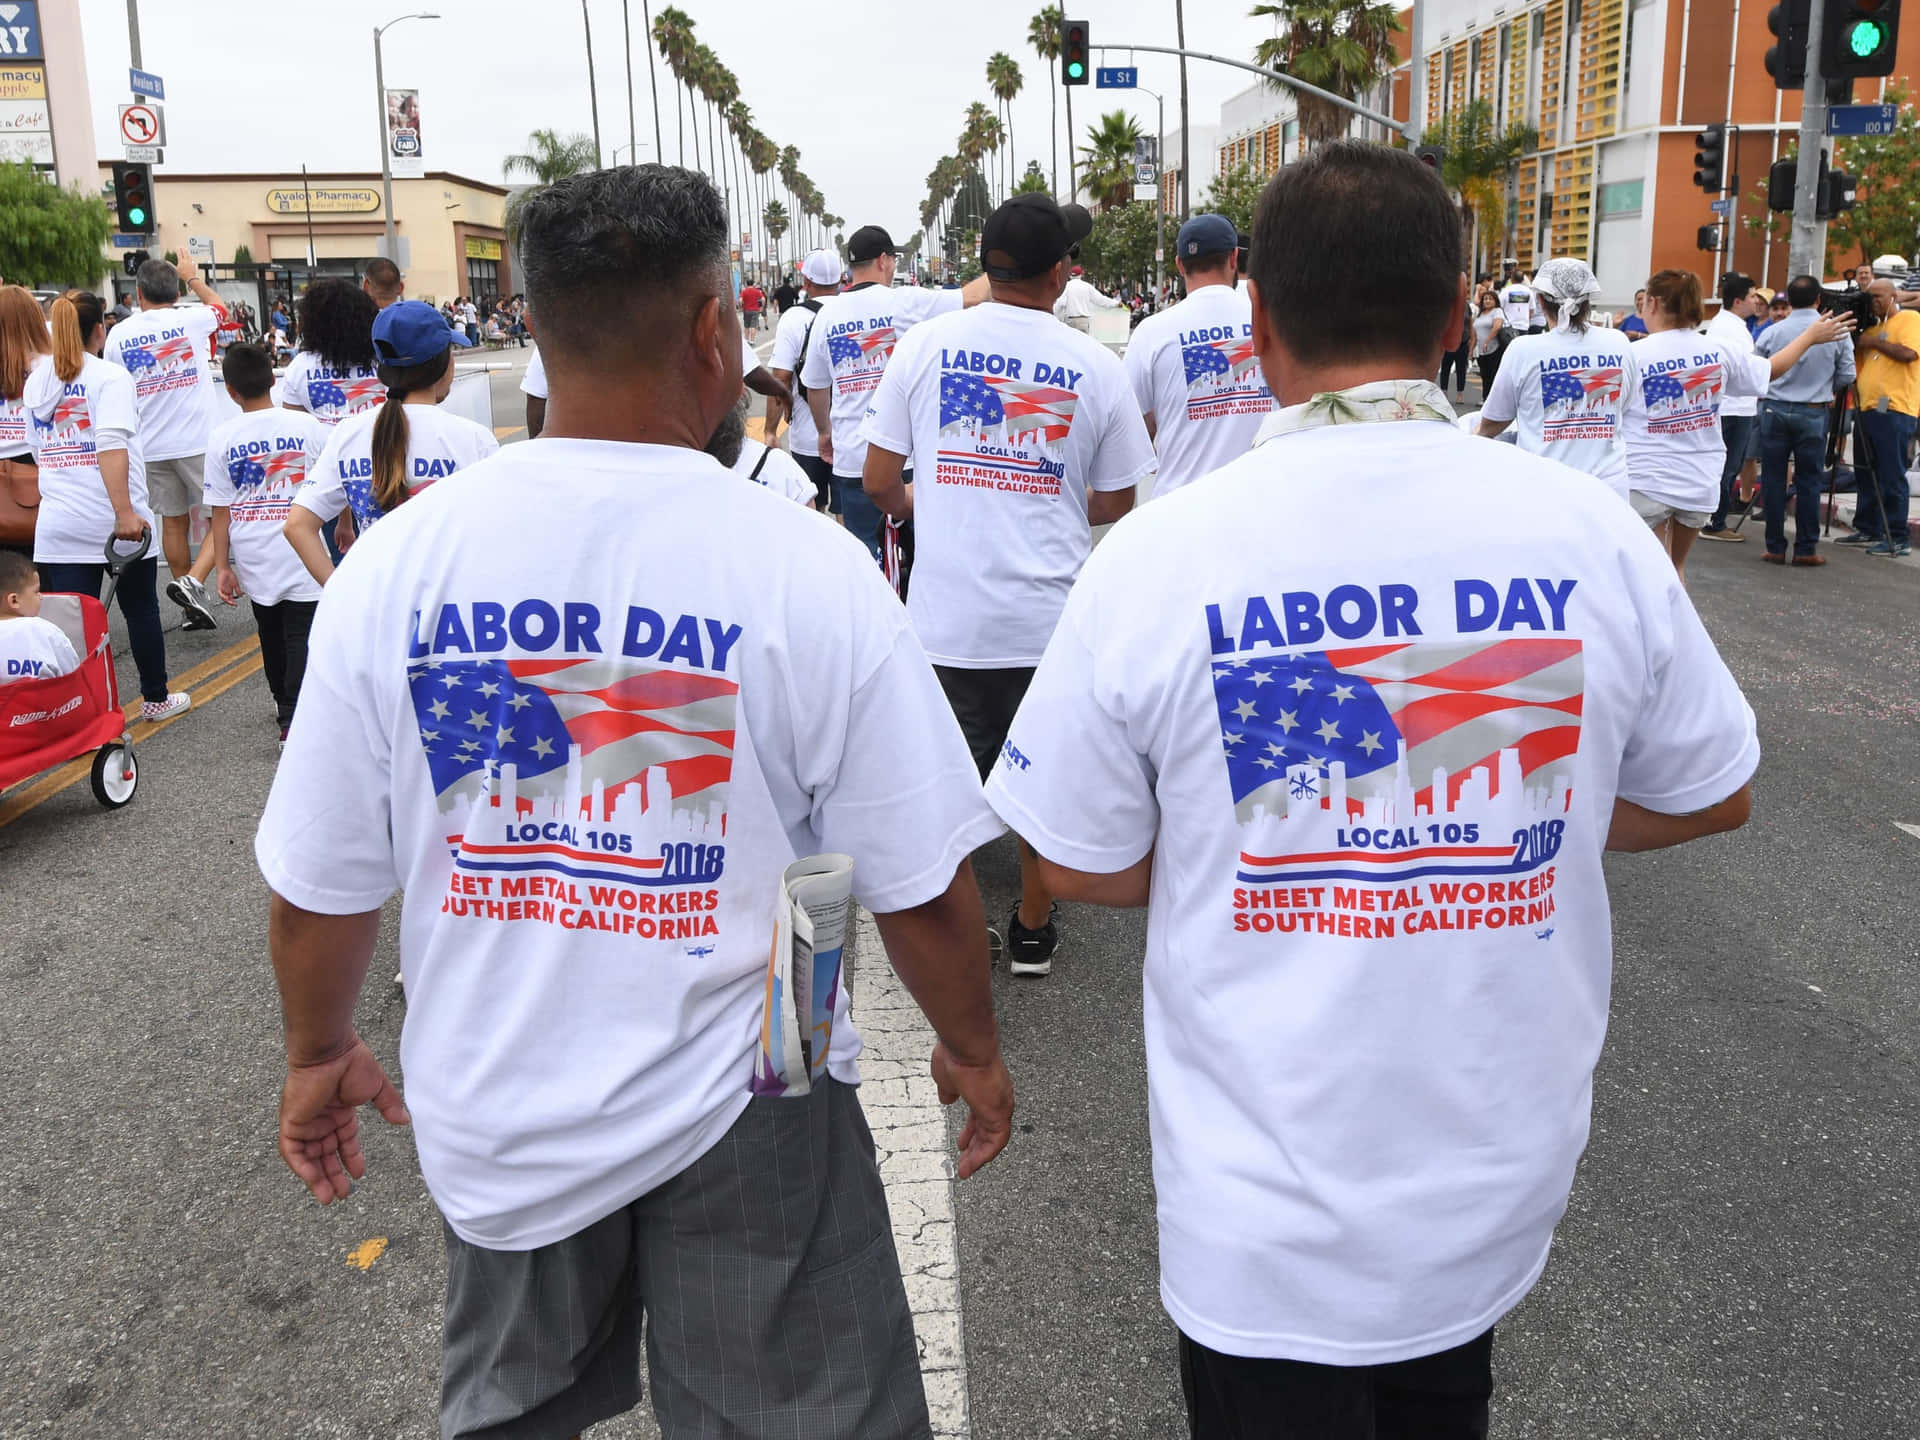 "Honoring all those who work hard on Labor Day"